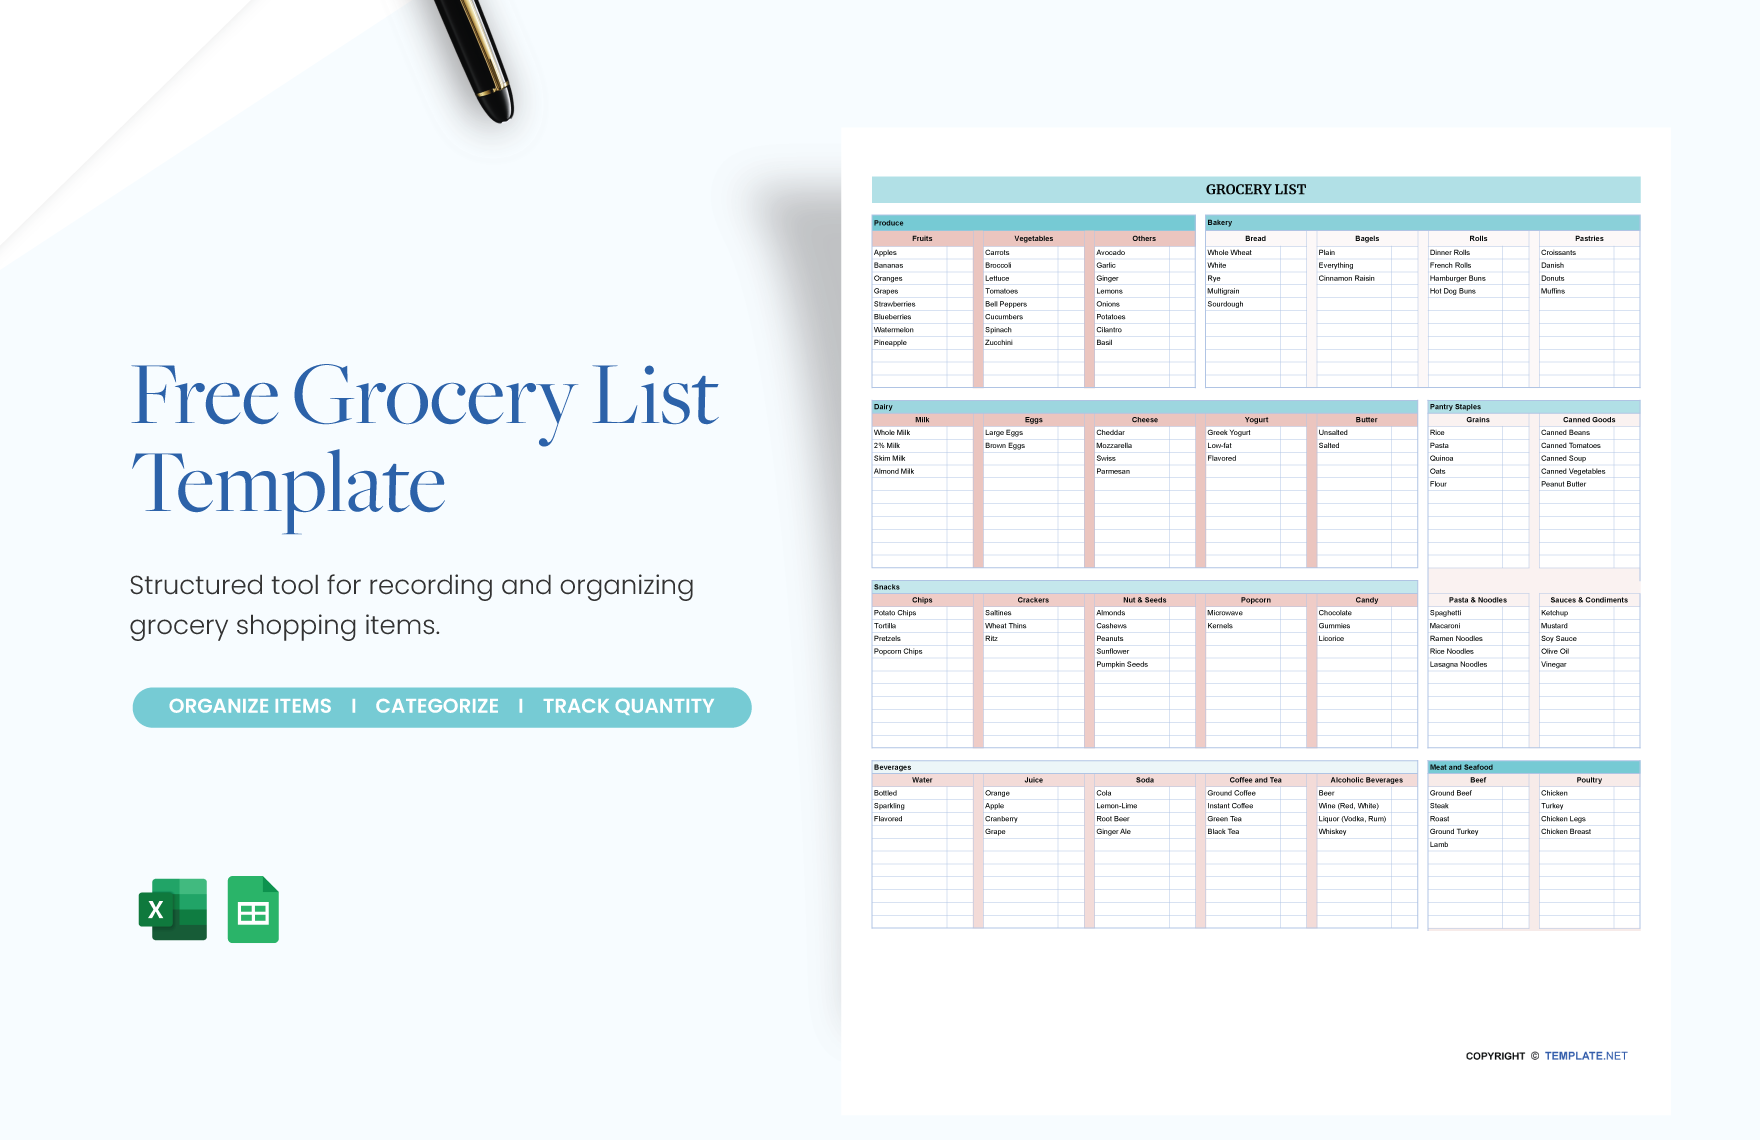 Free Grocery List Template